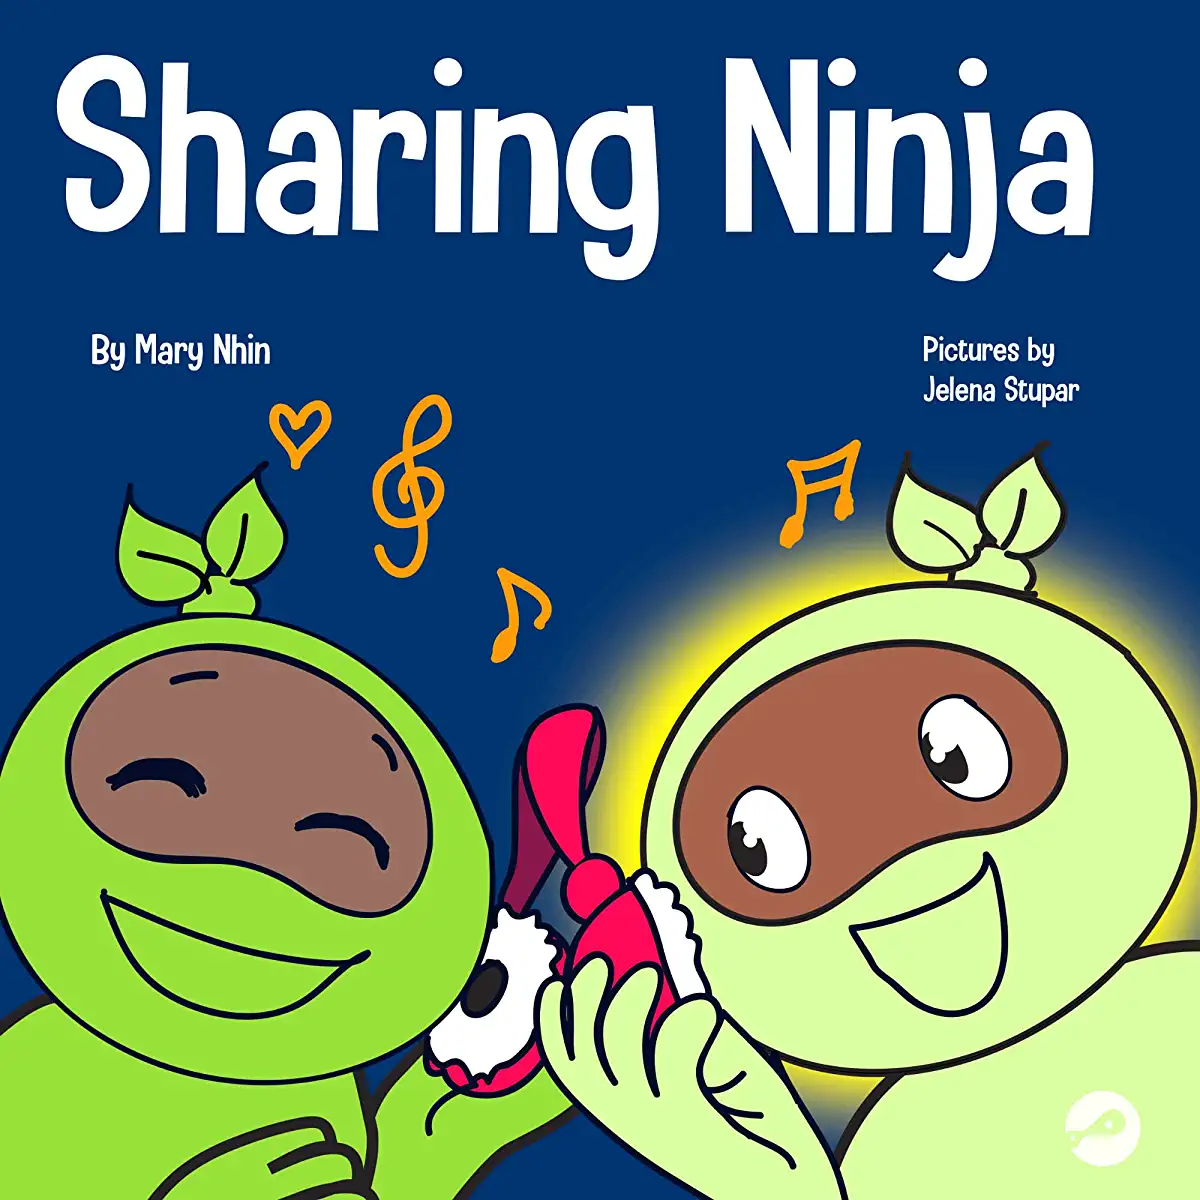 Sharing Ninja: A Children's' Book About Learning How to Share and Overcoming Selfish Behaviors